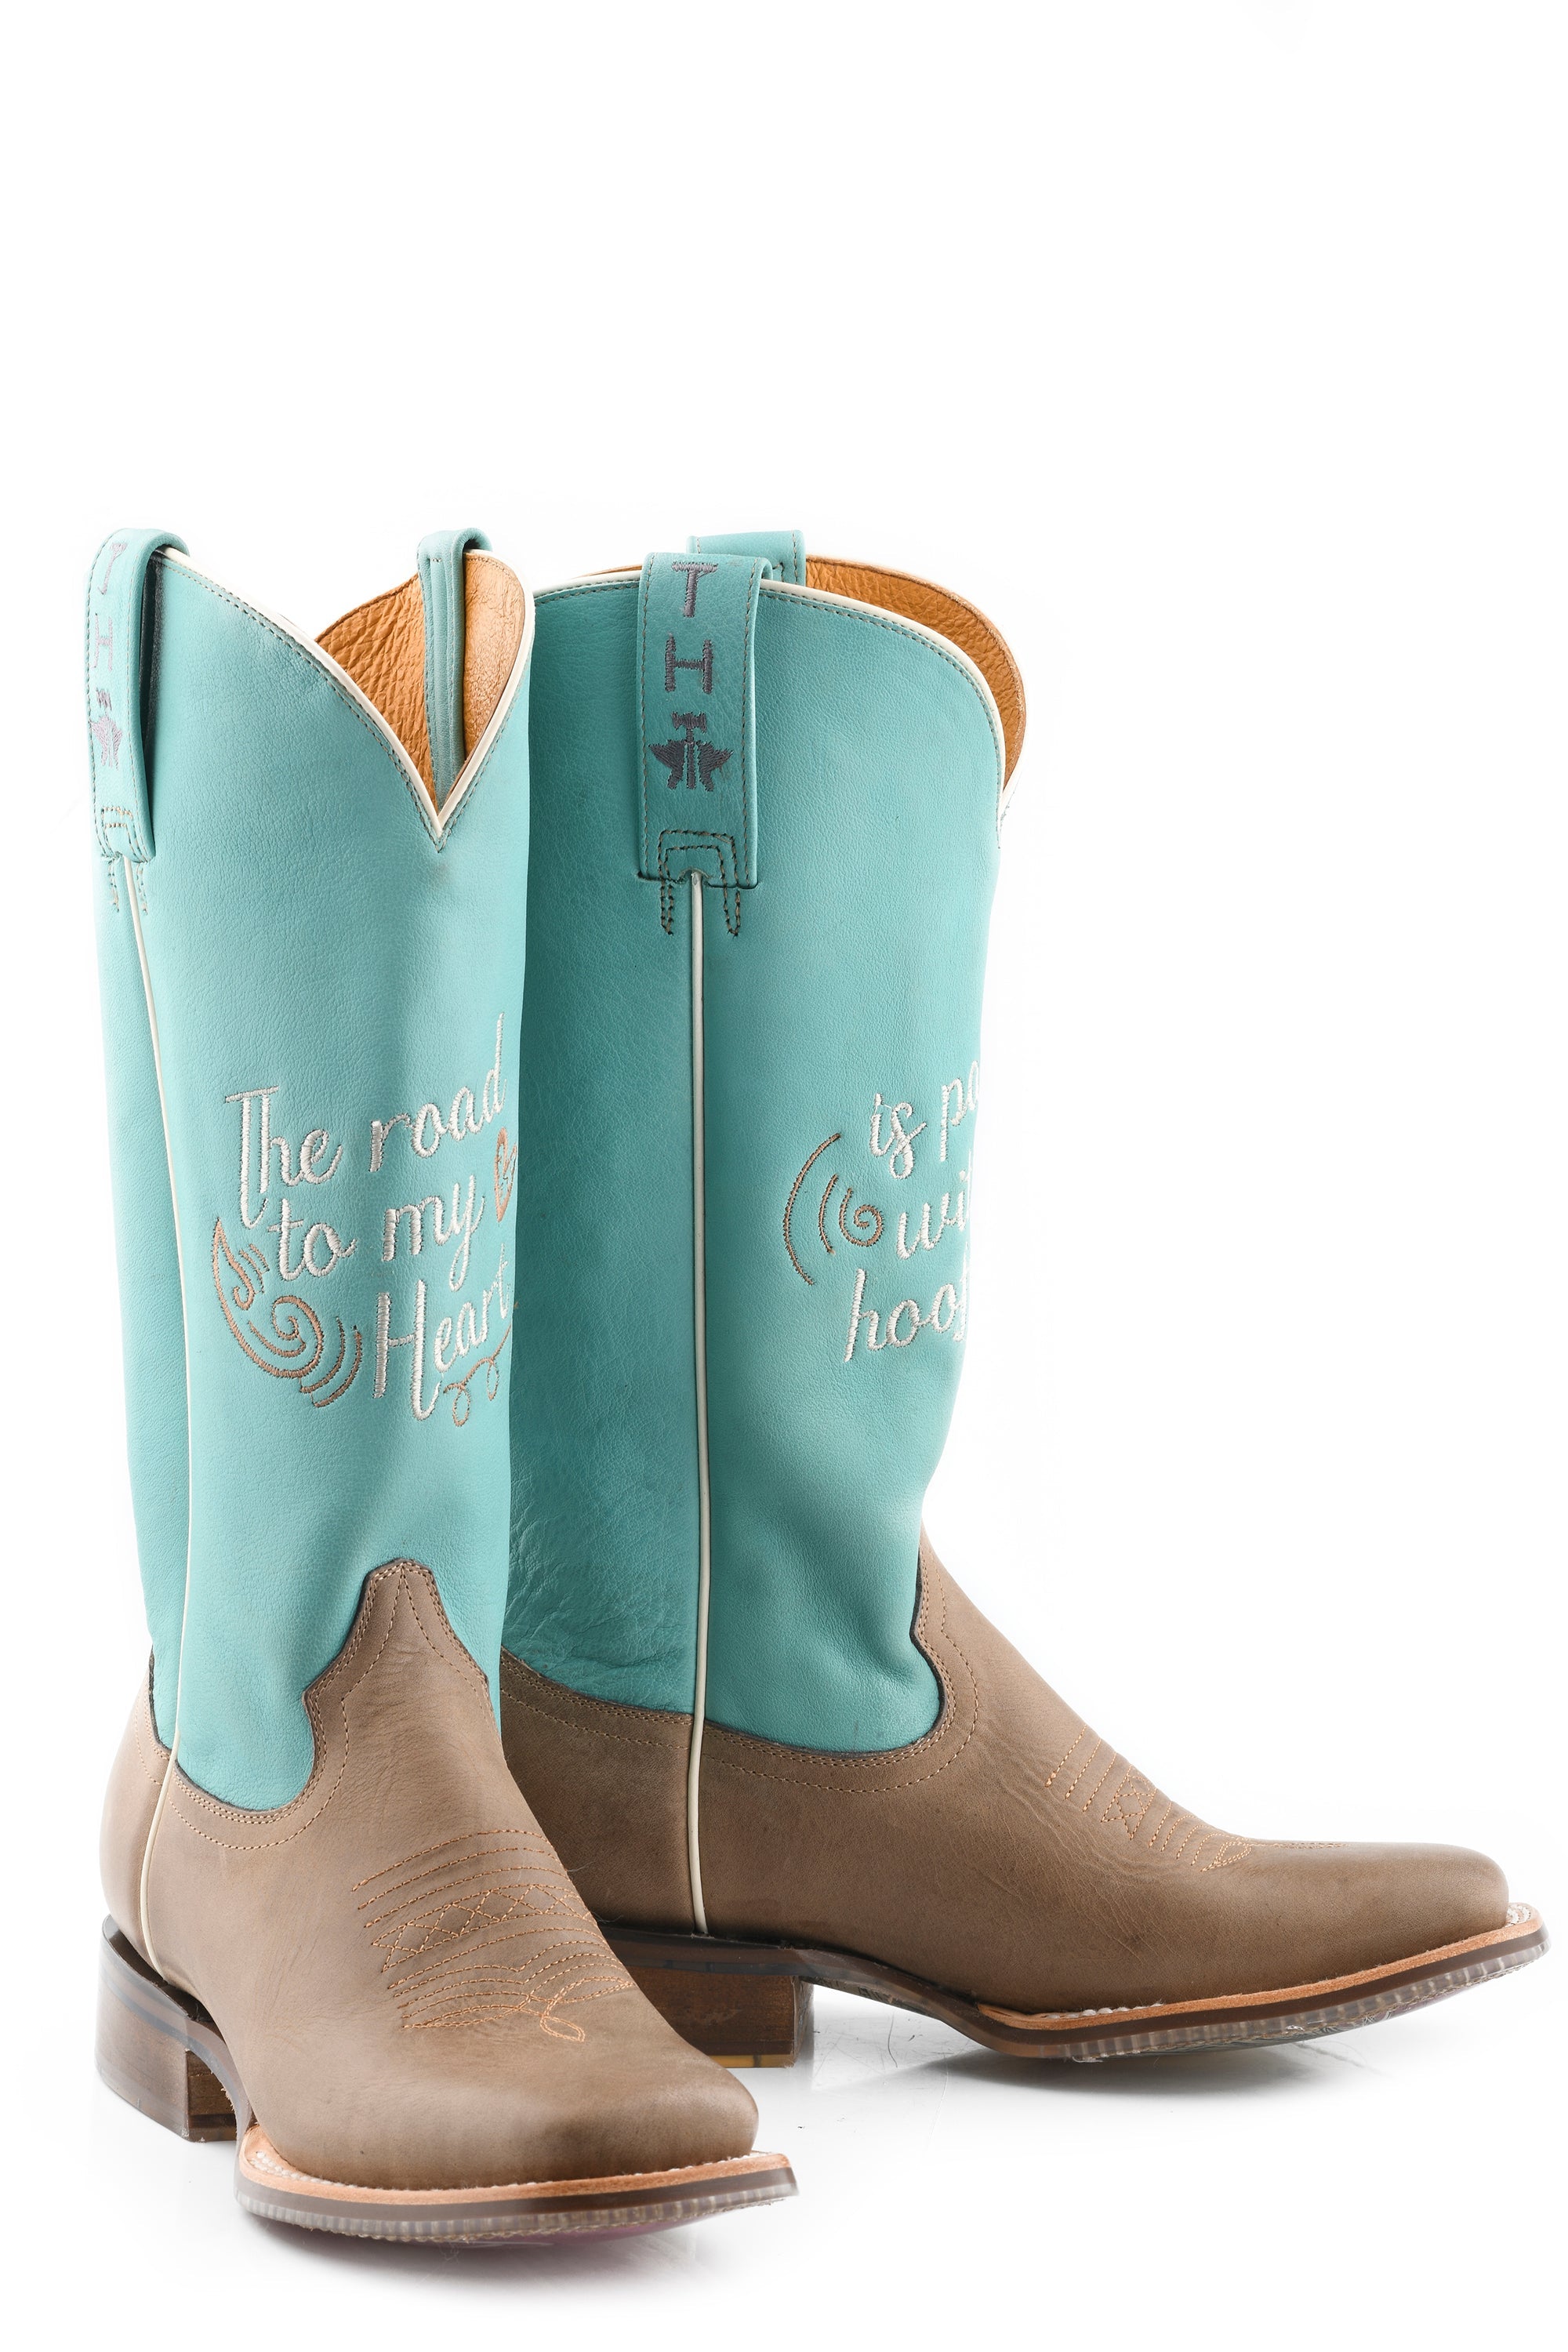 Tin Haul WOMENS A COWGIRLS MOTTO WITH BORN TO BE FREE SOLE